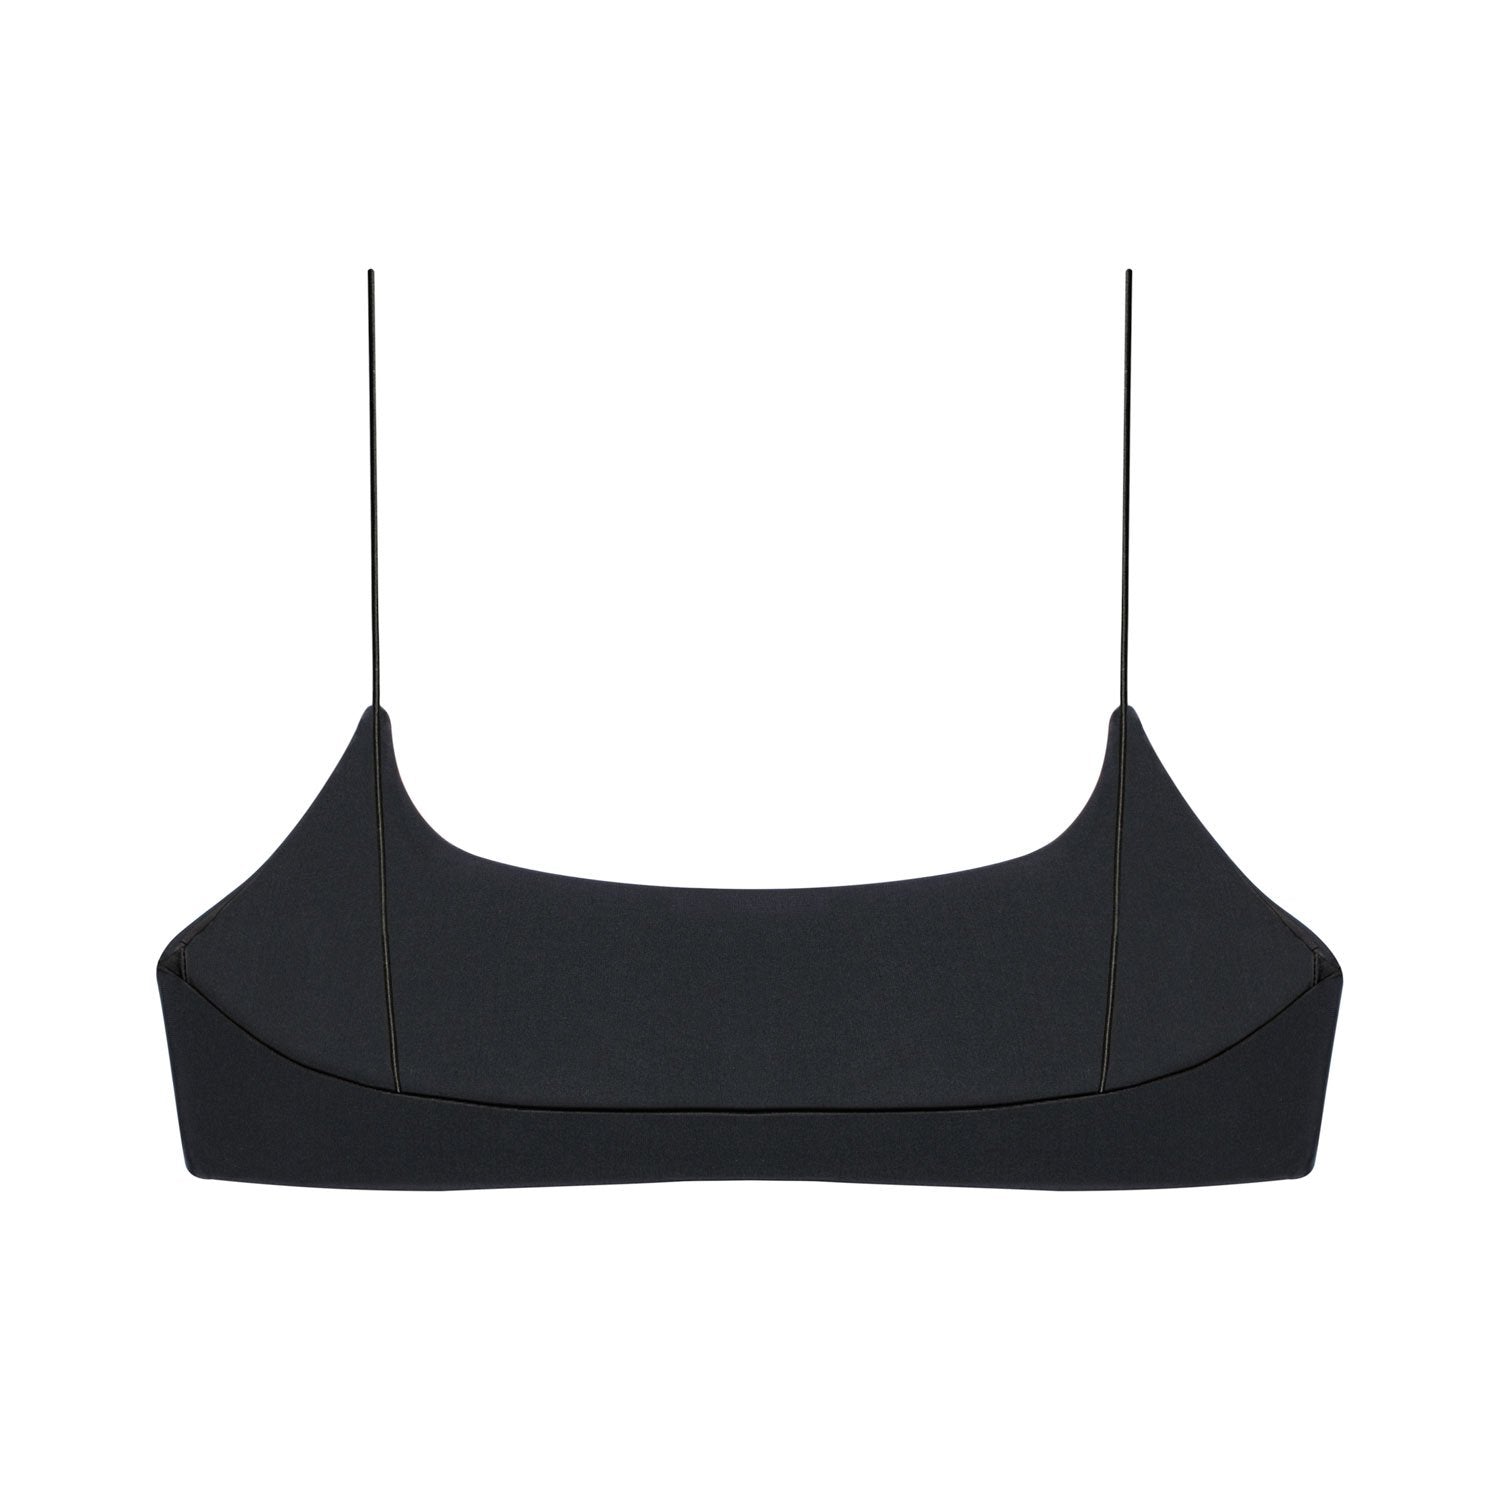 Load image into Gallery viewer, Flat image of the back of the Micro Muse Scoop Top in black